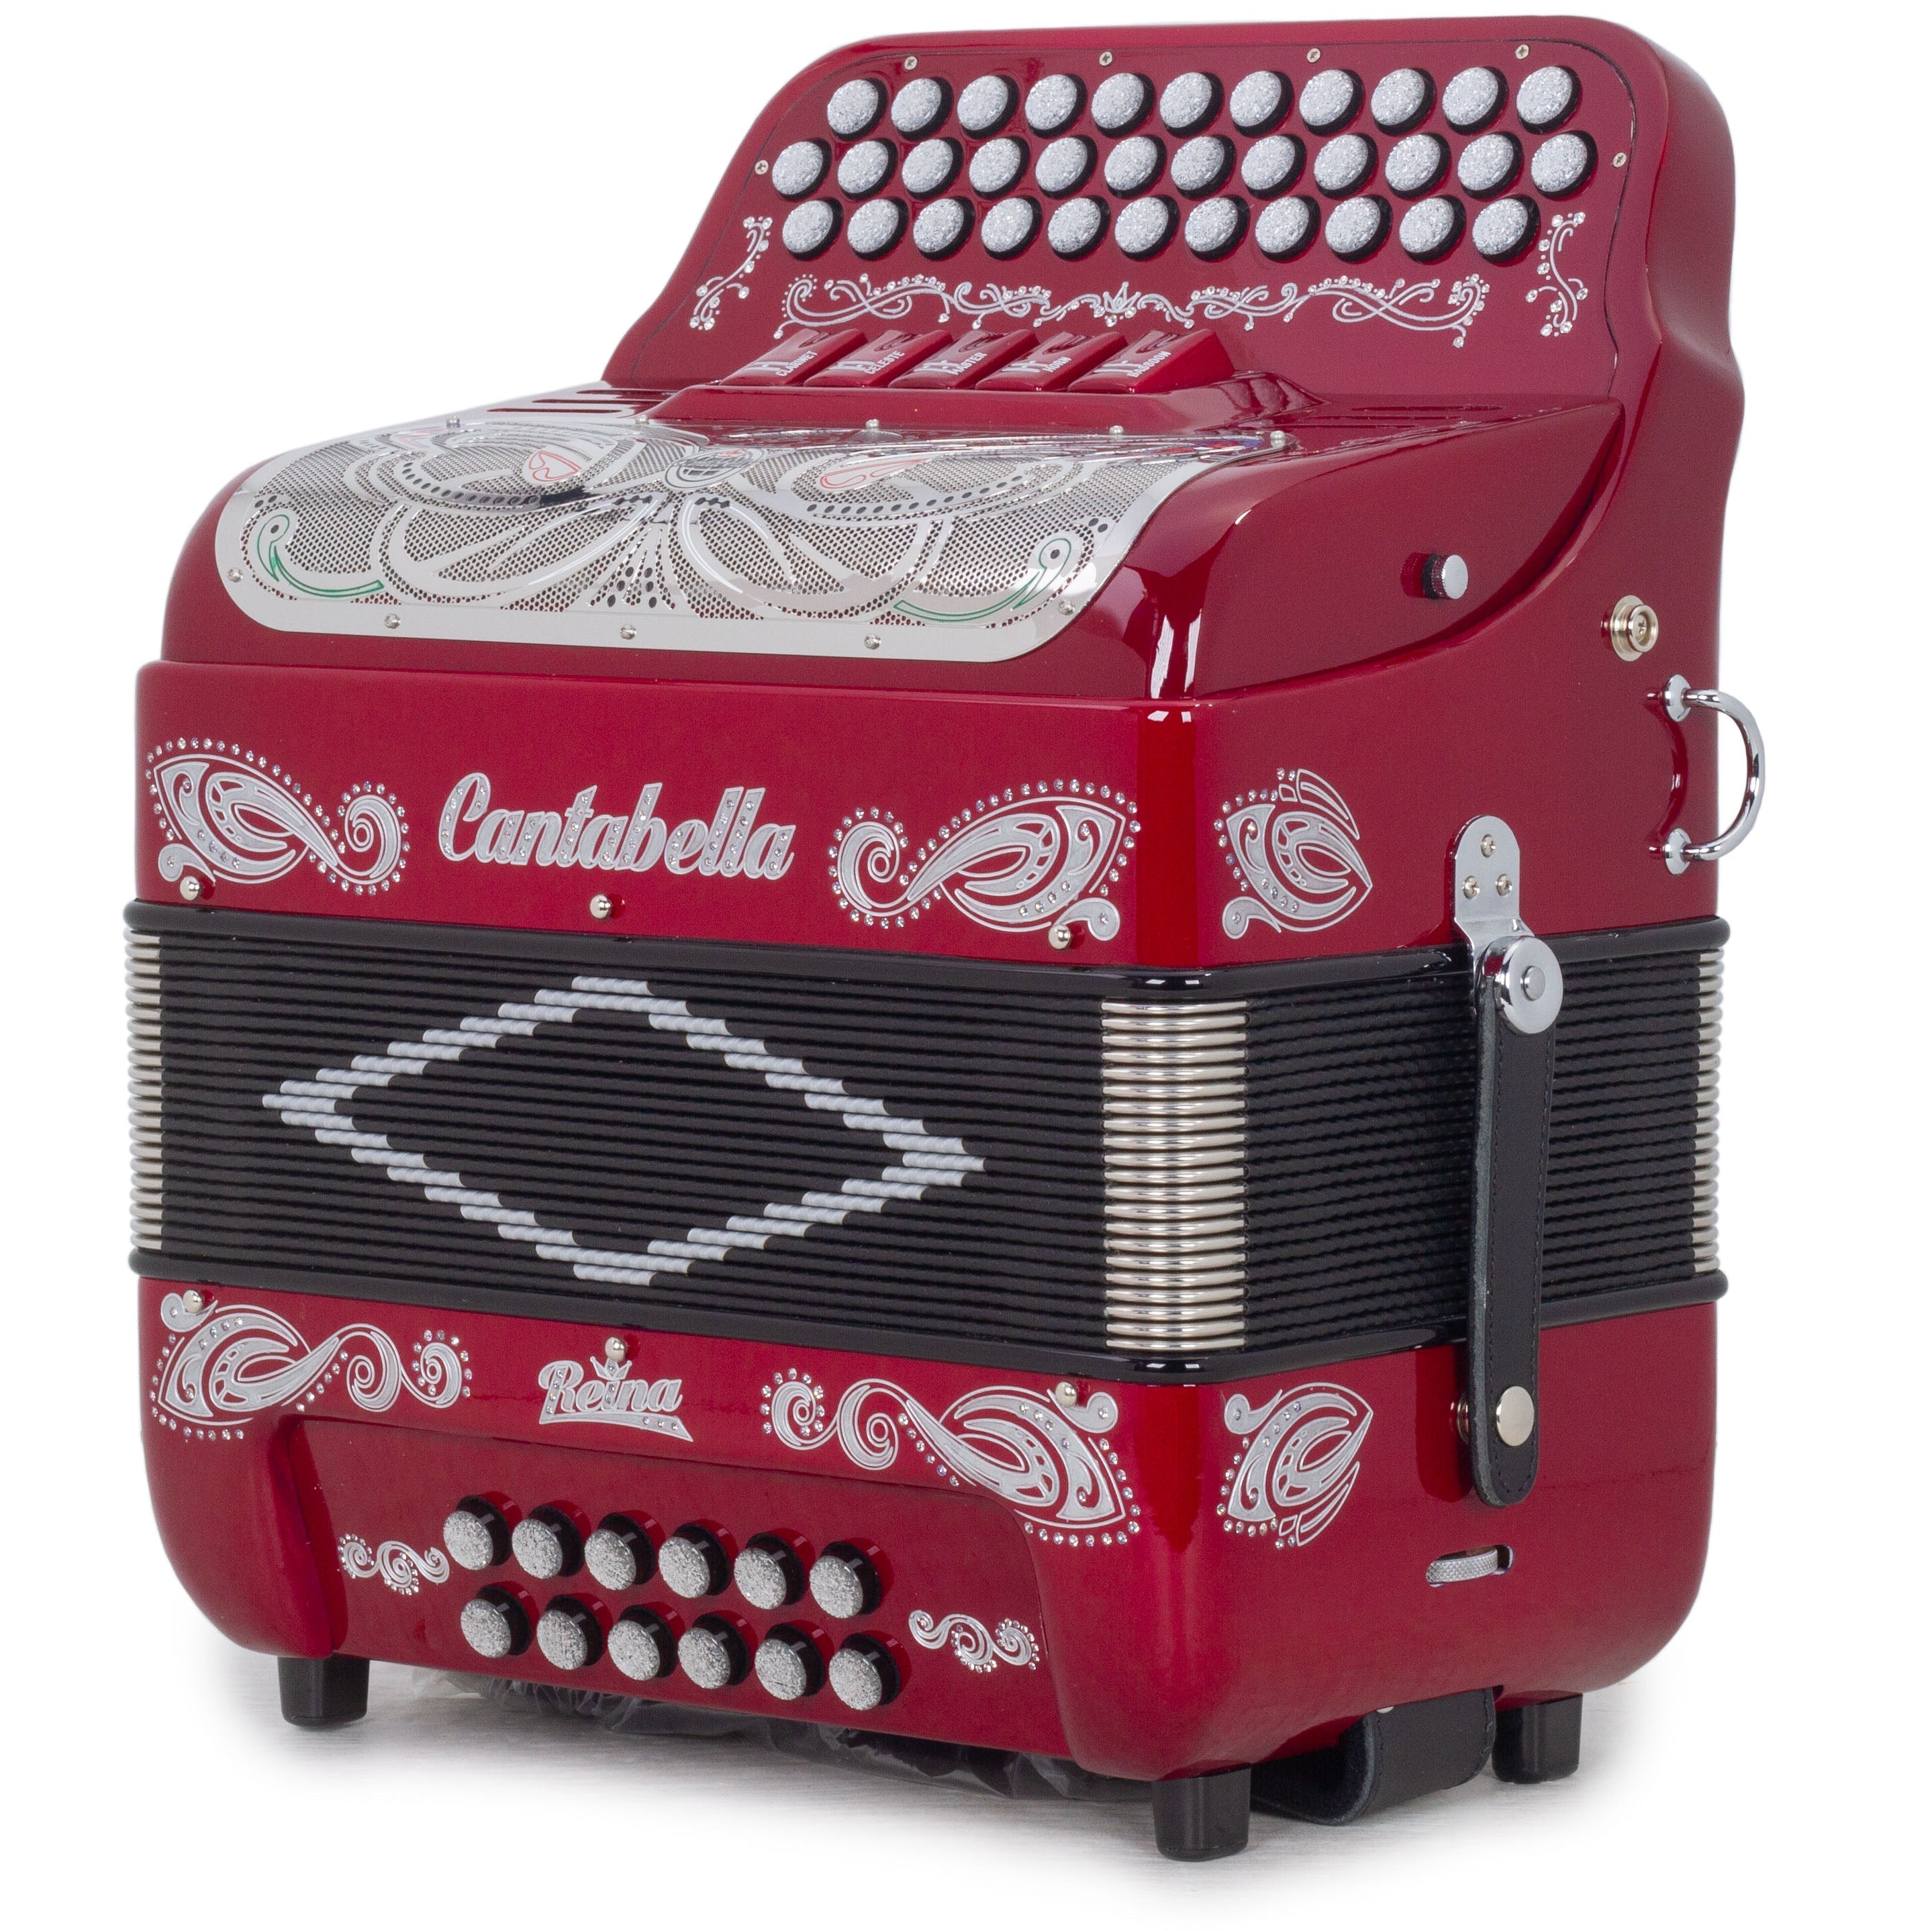 Cantabella Reina Accordion Ultra Compact 5 Switch GCF Maroon with Silver-Accordions & Concertinas-Cantabella- Hermes Music